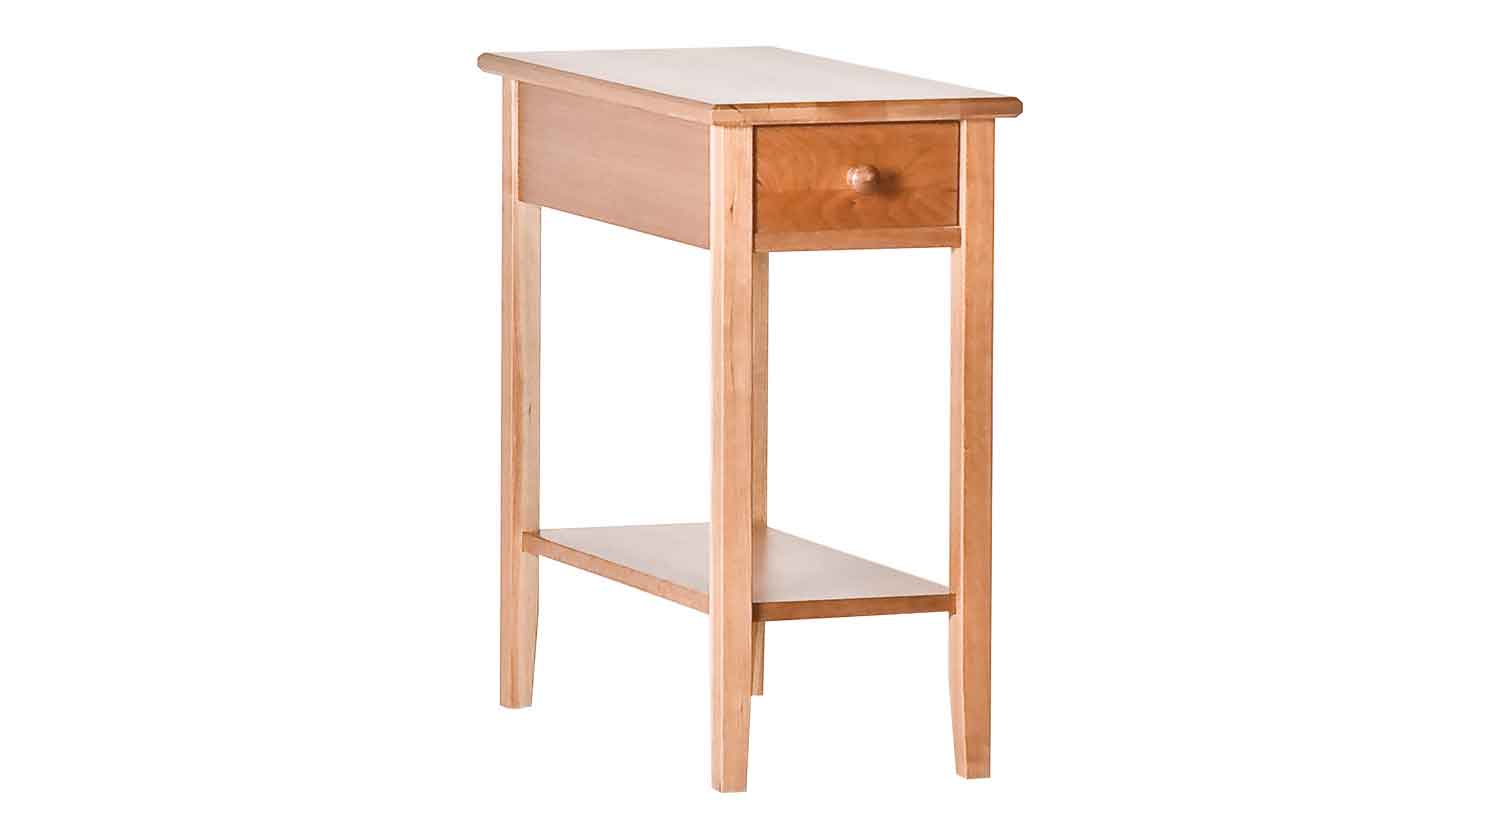 circle furniture shaker narrow side table accent tables chairside pier one catalog gold mirrored blue end living room light wood bedside dining chairs toronto nic bunnings